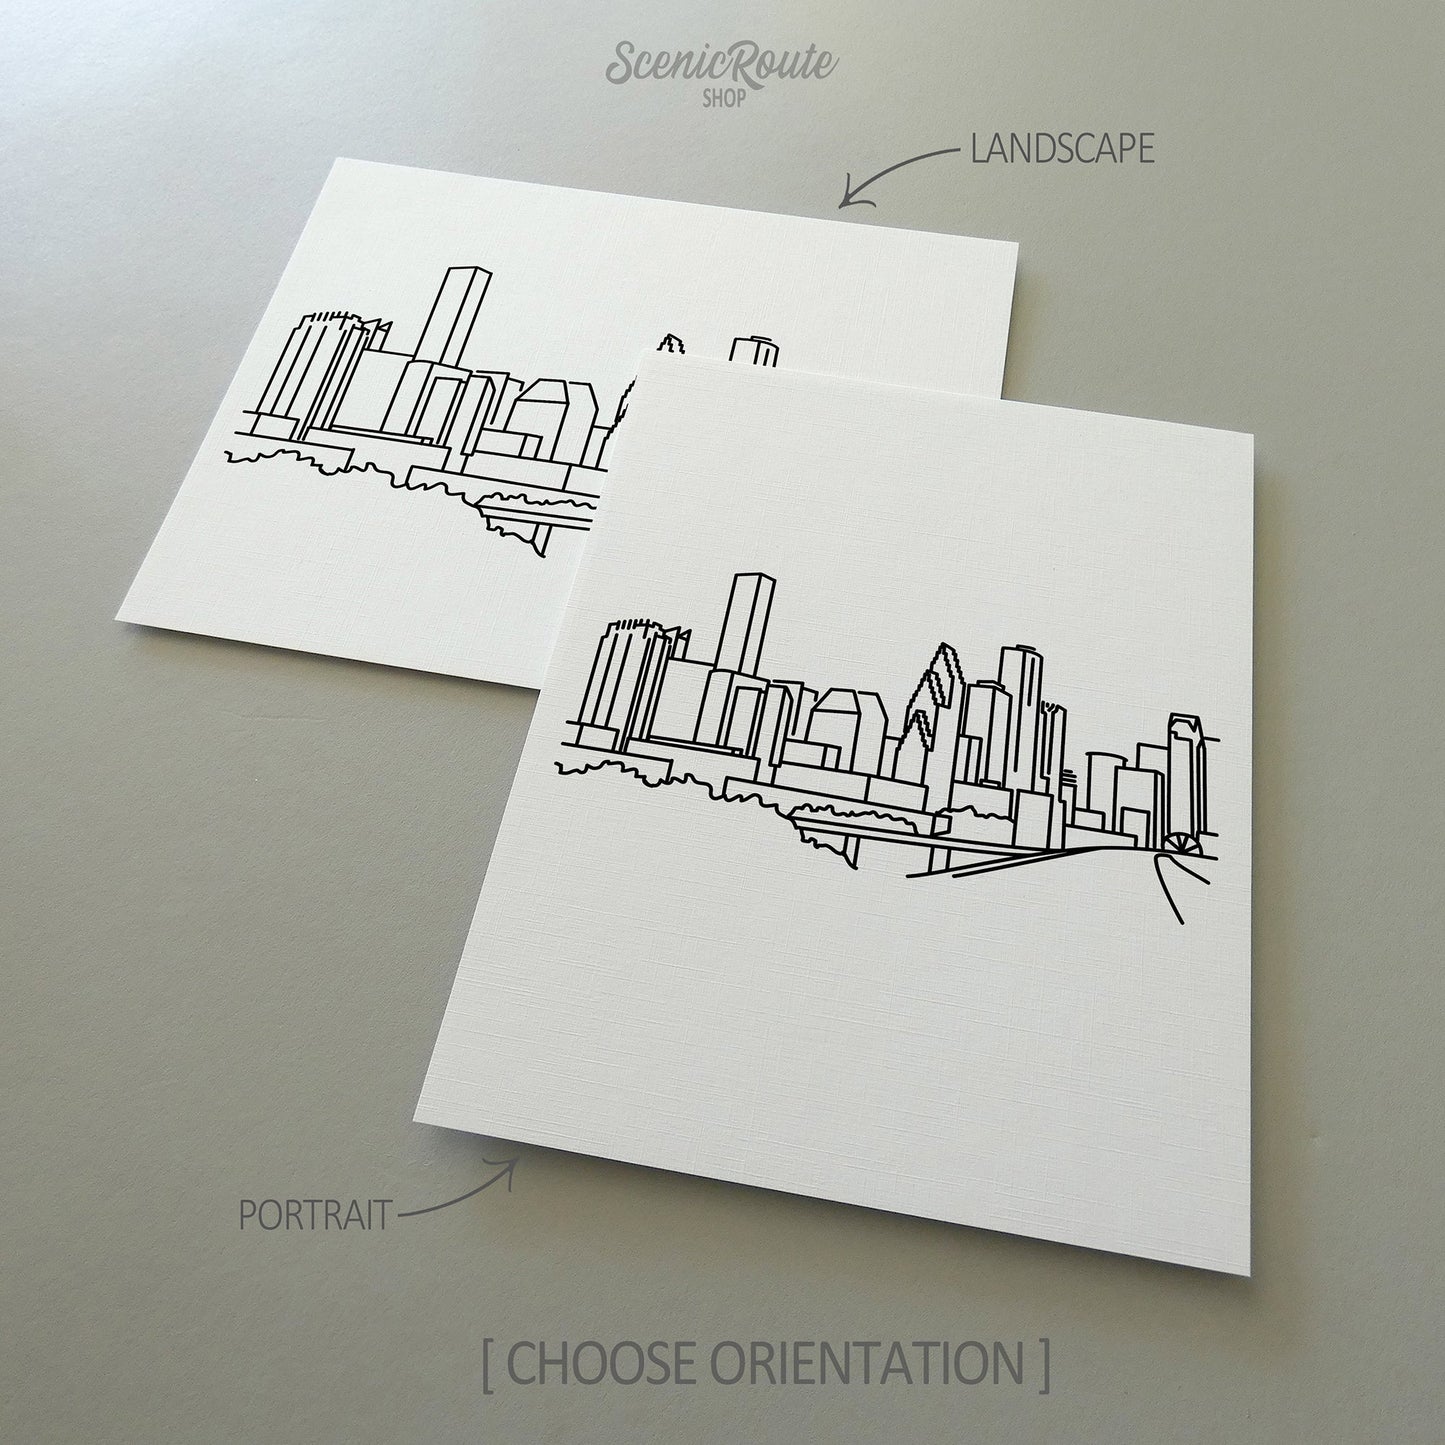 Two line art drawings of the Houston Skyline on white linen paper with a gray background.  The pieces are shown in portrait and landscape orientation for the available art print options.